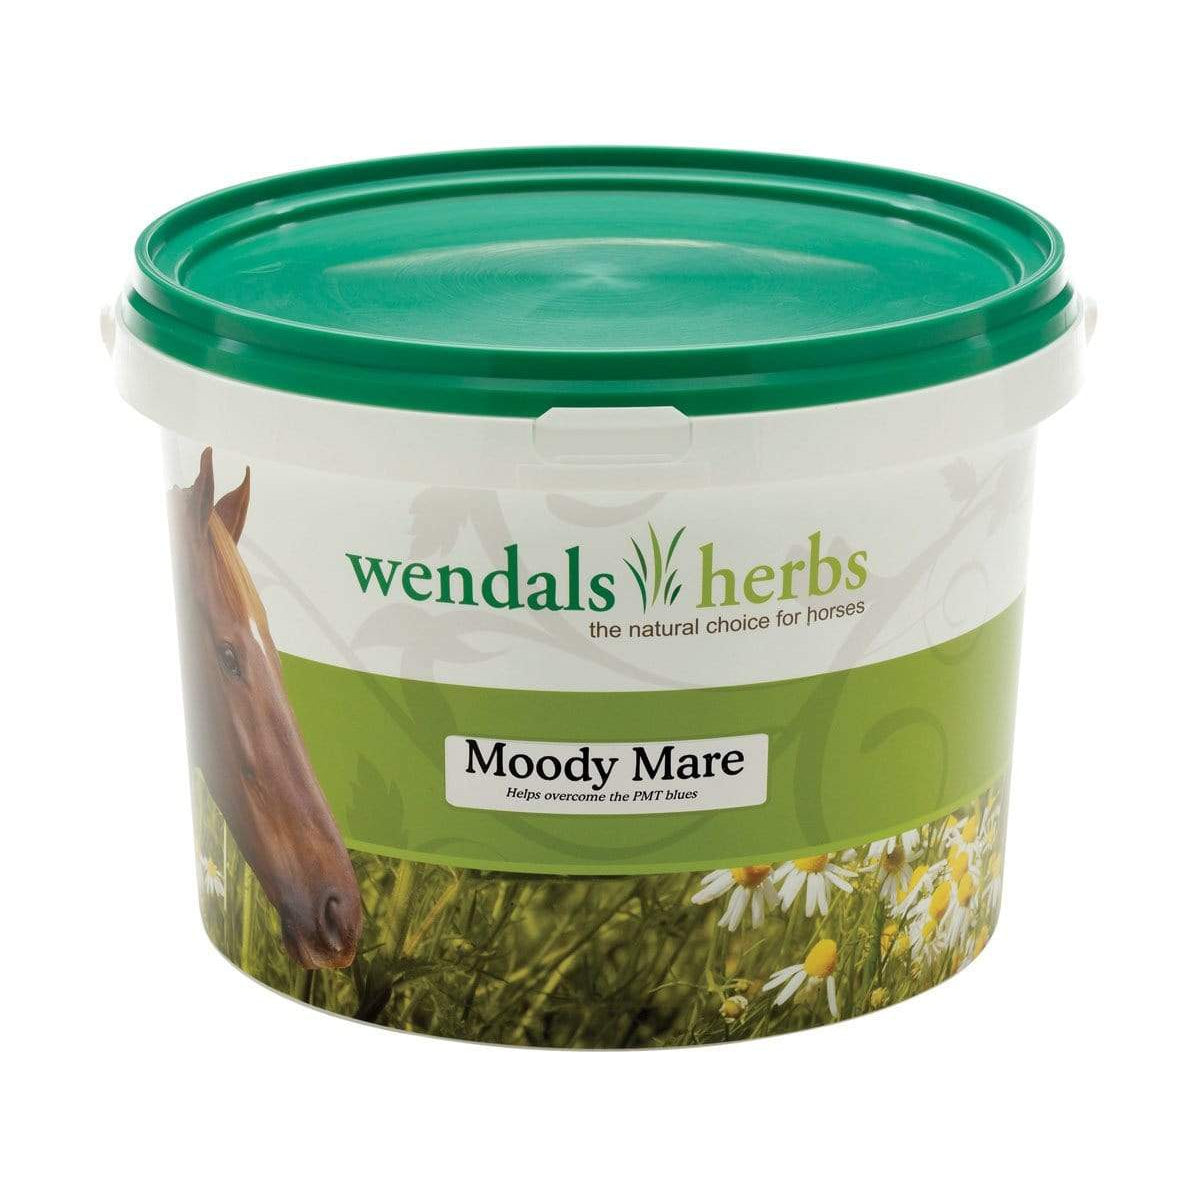 Wendals Herbs Moody Mare